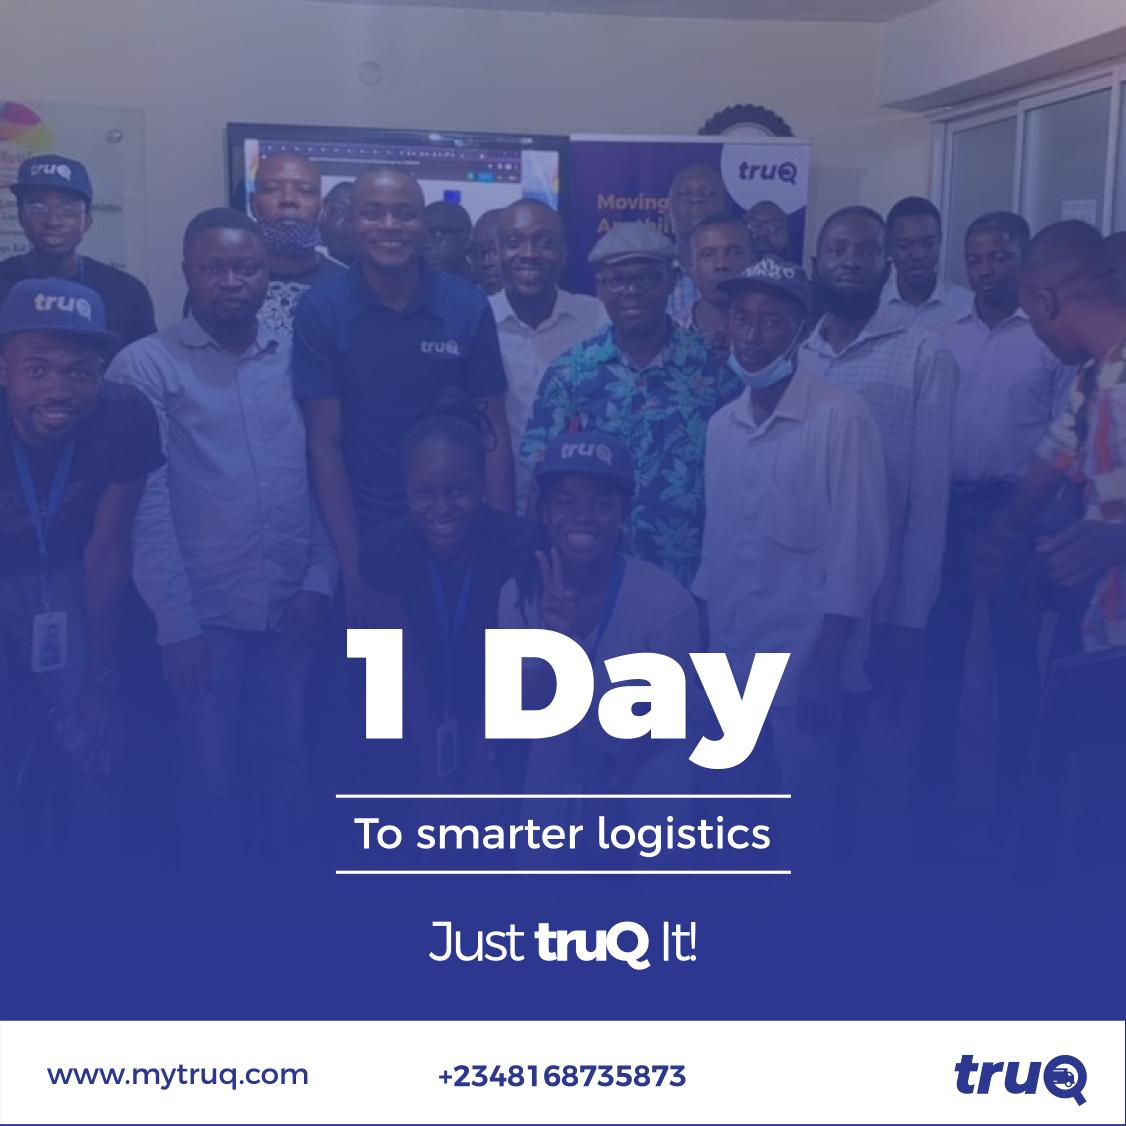 Yaaaaaay!!!!🕺🏿💃🏿🕺🏿💃🏿

It's almost here! Just a few more hours and the best logistics app in Nigeria will go live. 

#justtruQit
#logisticssolution